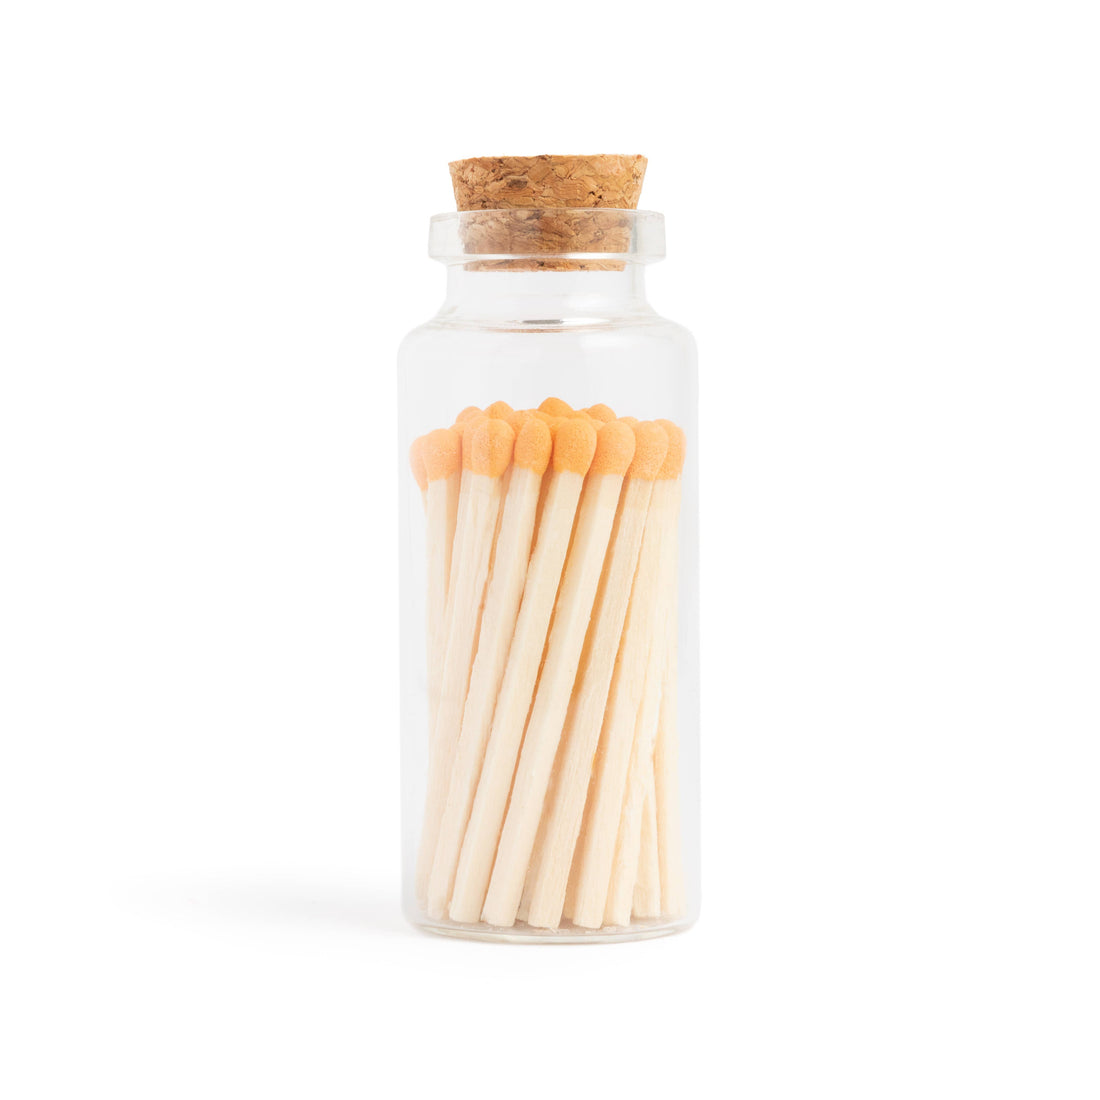 Apricot Cream Matches in Medium Corked Vial